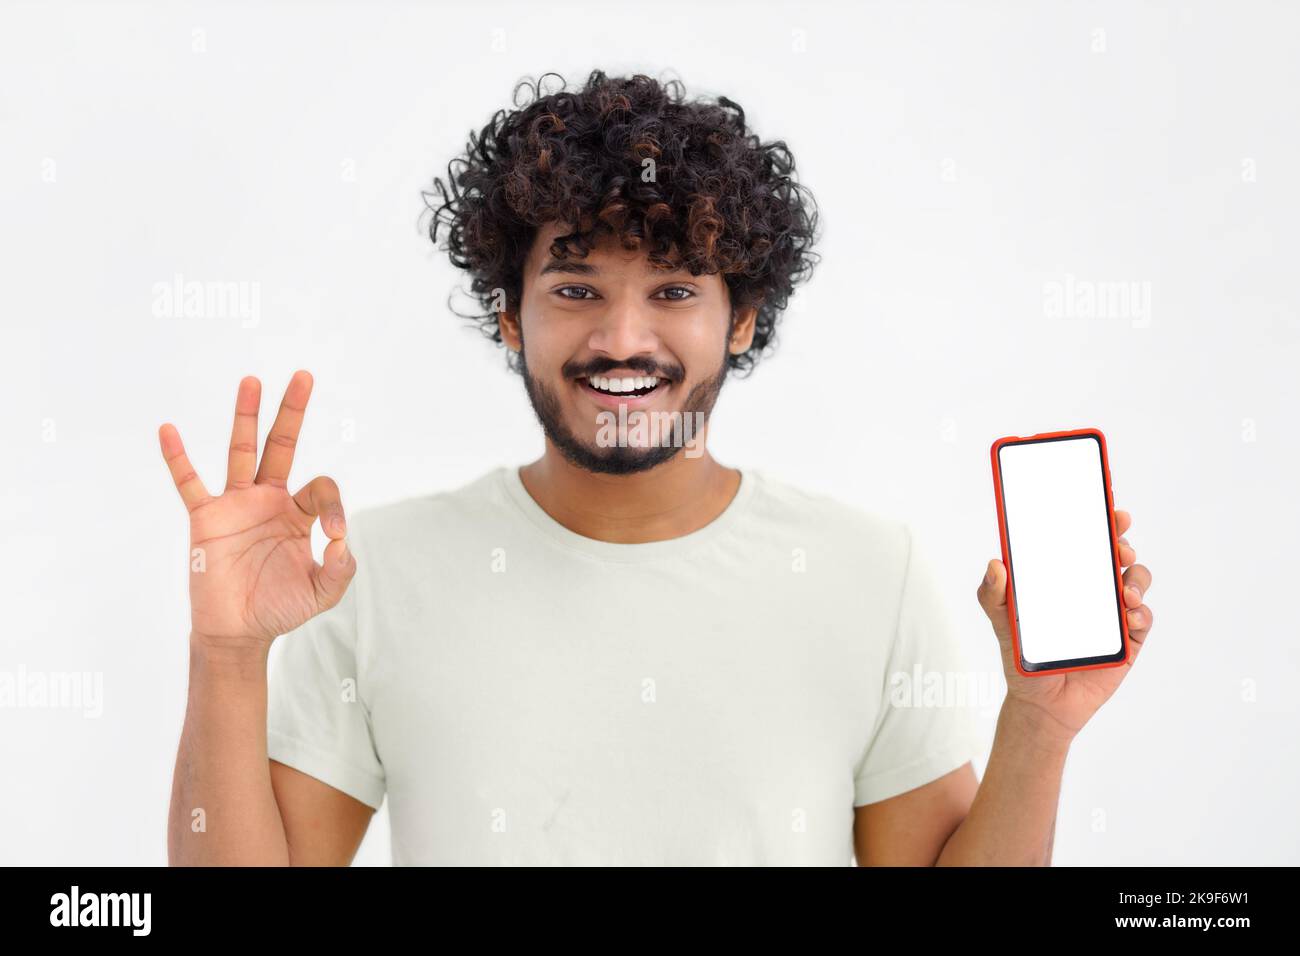 Portrait of young Asian man with mobile phone on white background. Male with curly hair holding a smartphone Stock Photo